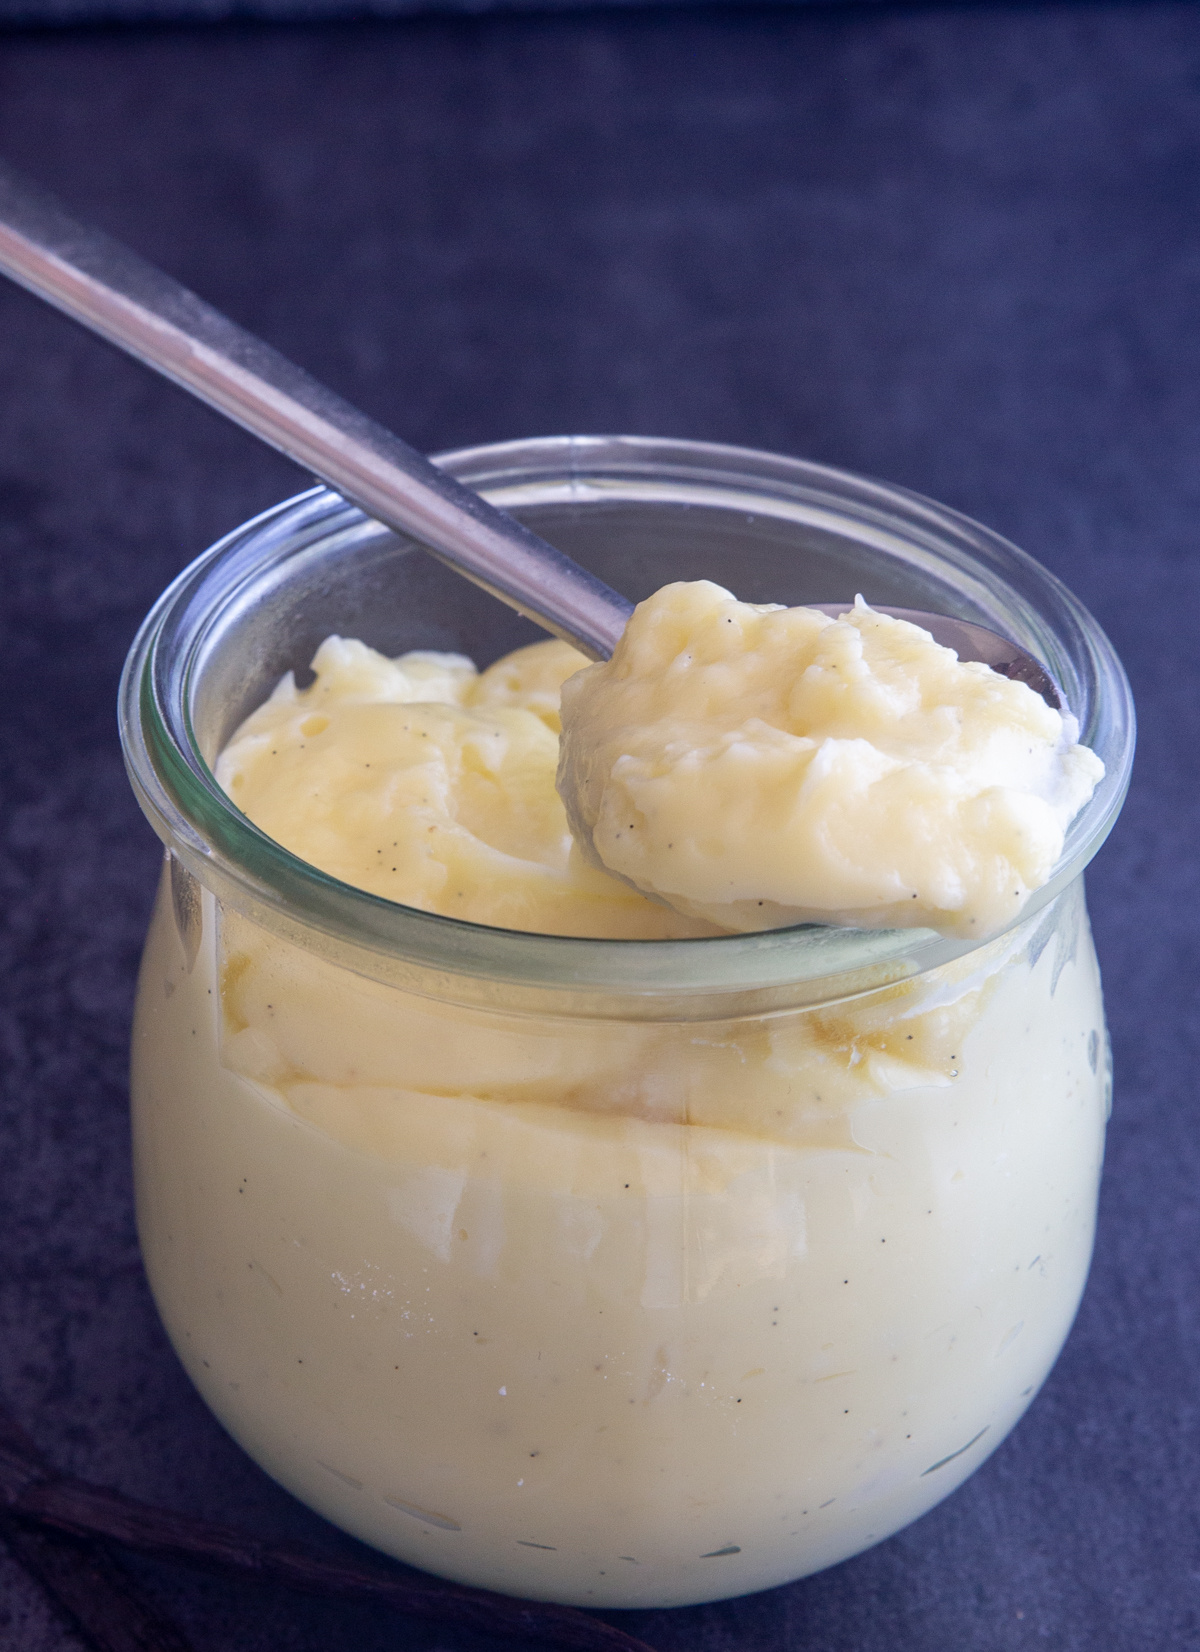 Pastry cream in a jar with some on a silver spoon.